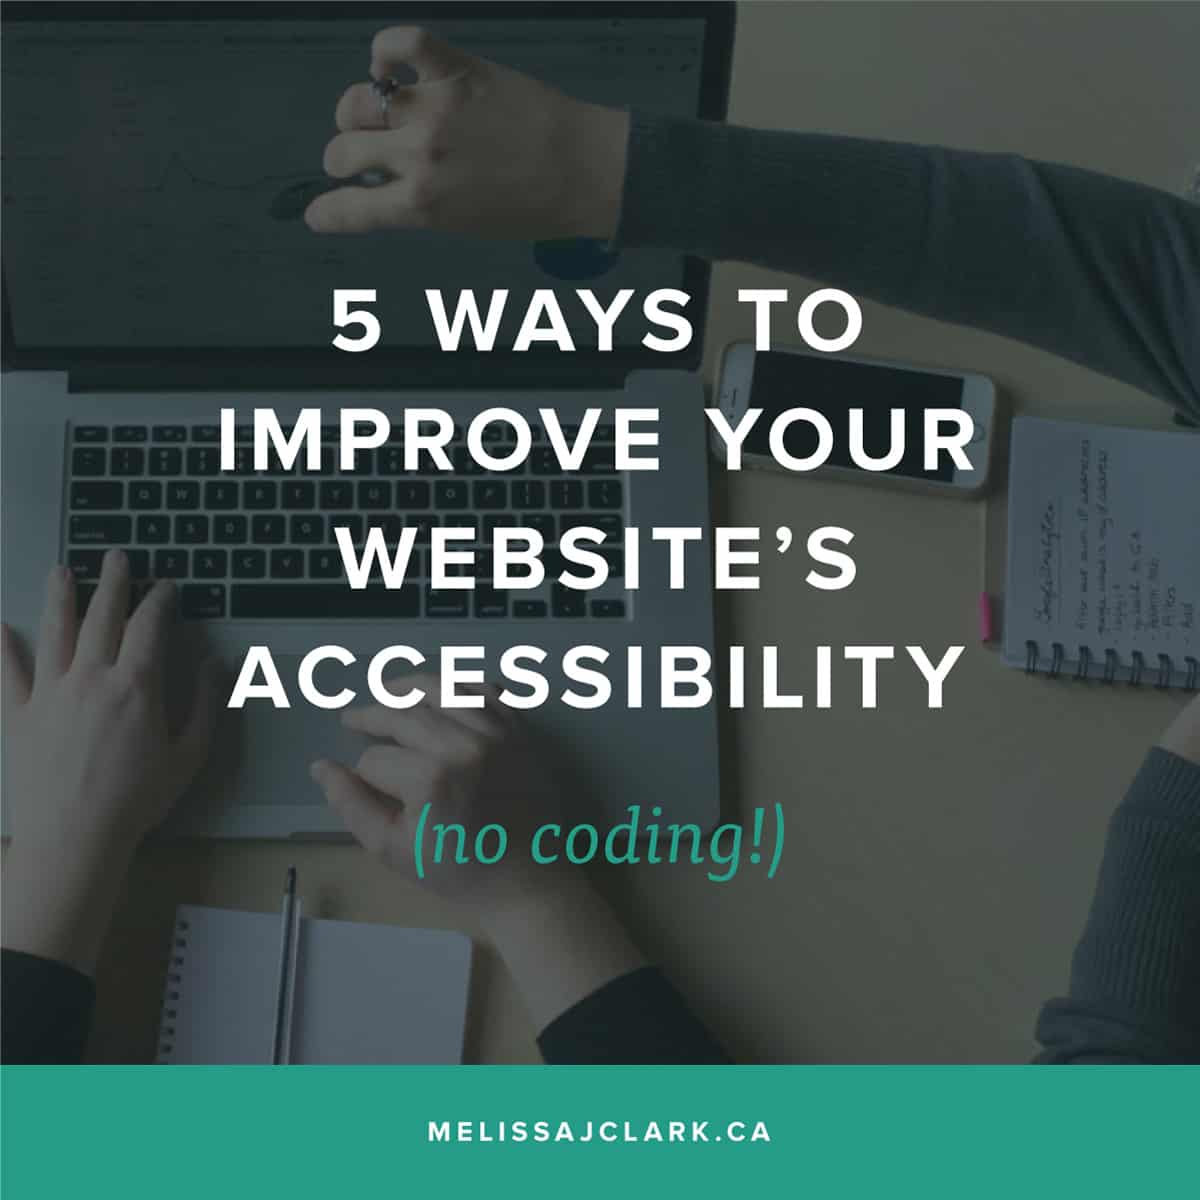 5 Ways to Improve your website's accessibility (no coding!)